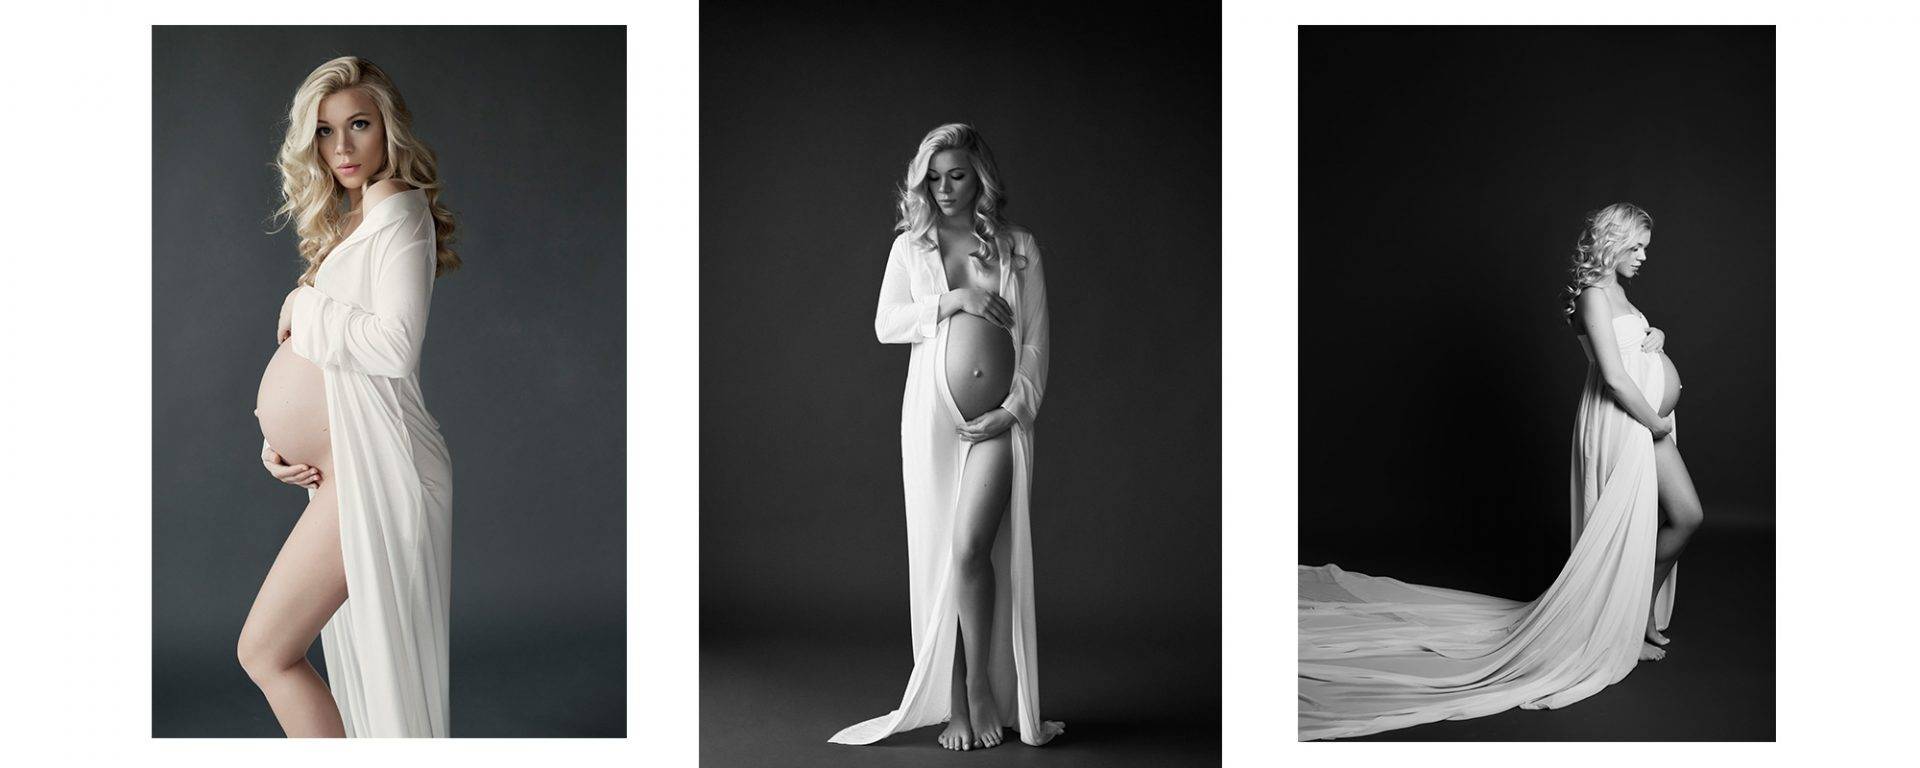 Blonde pregnant lady wearing a white robe for maternity photos.